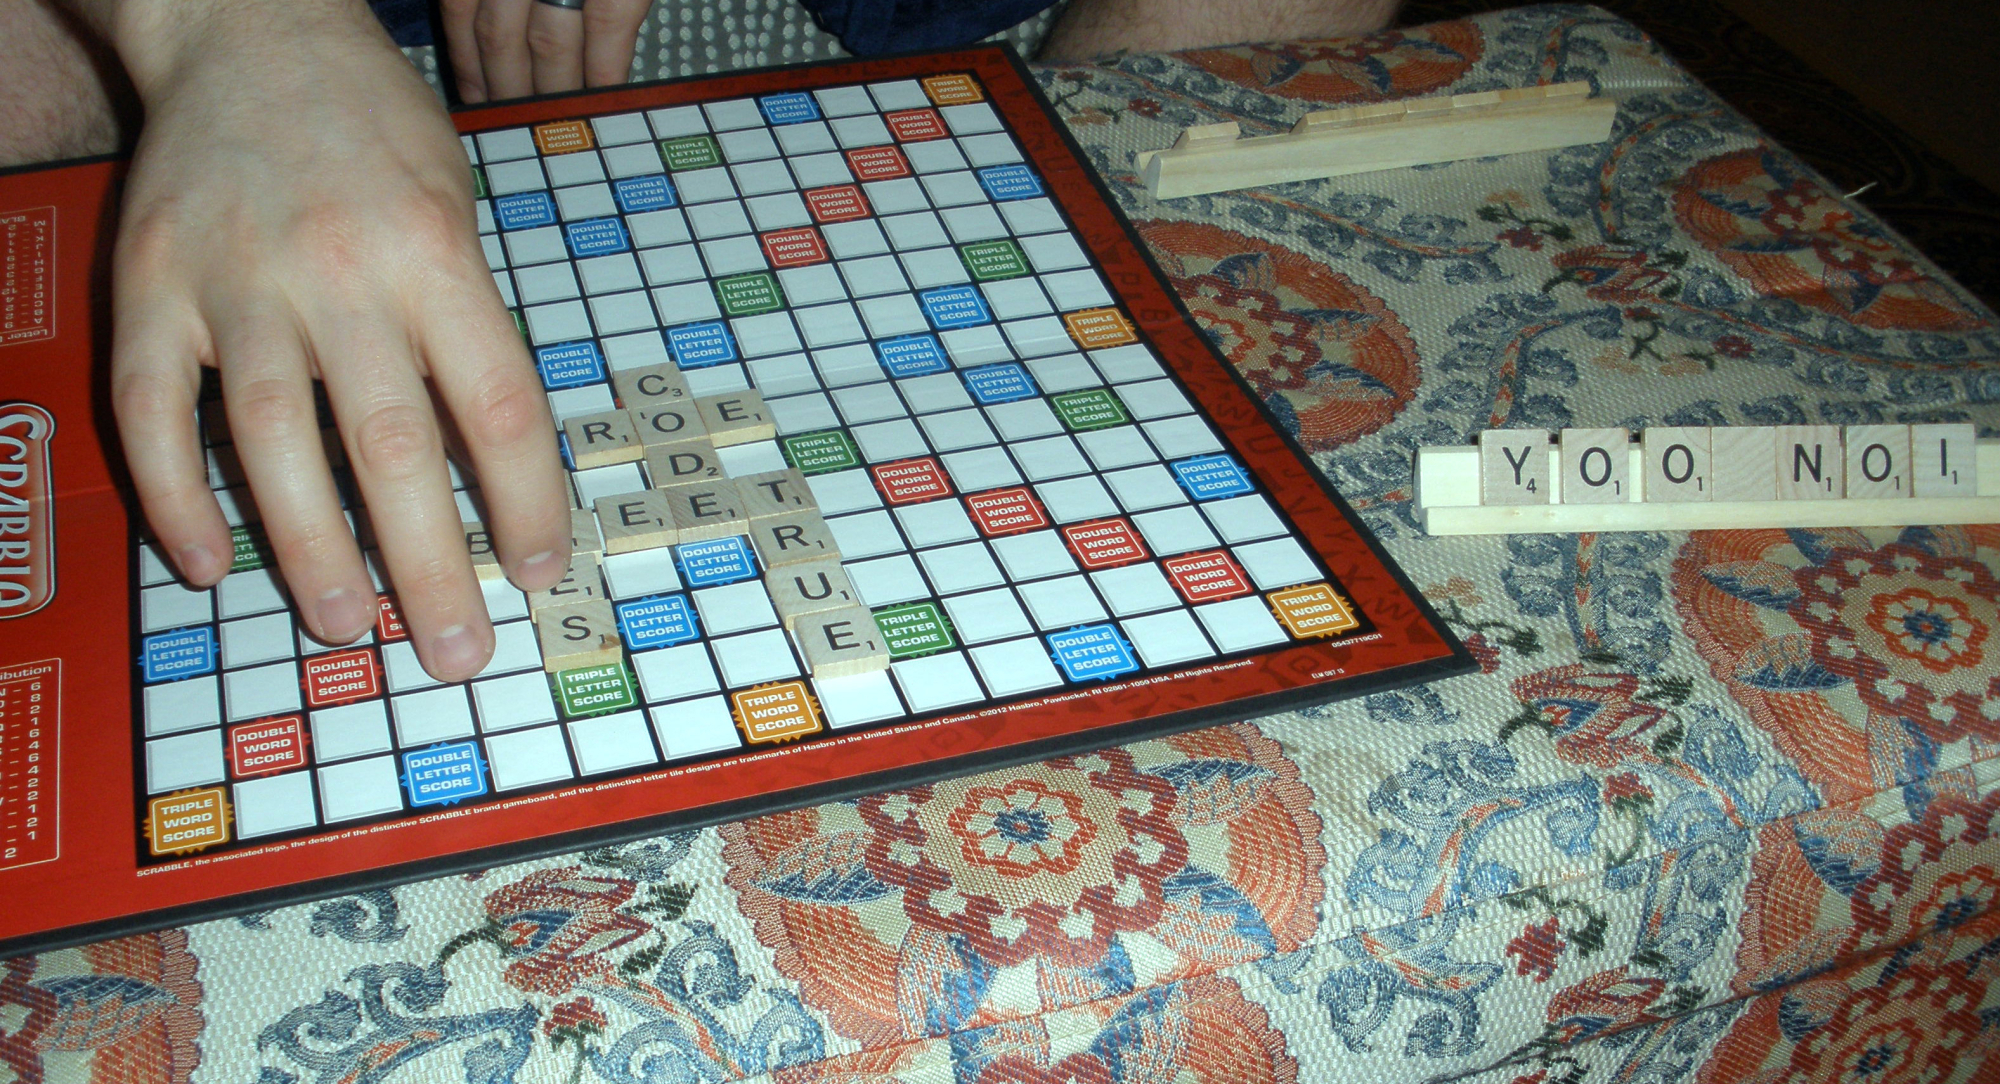 The Ultimate Word Game: Scrabble.